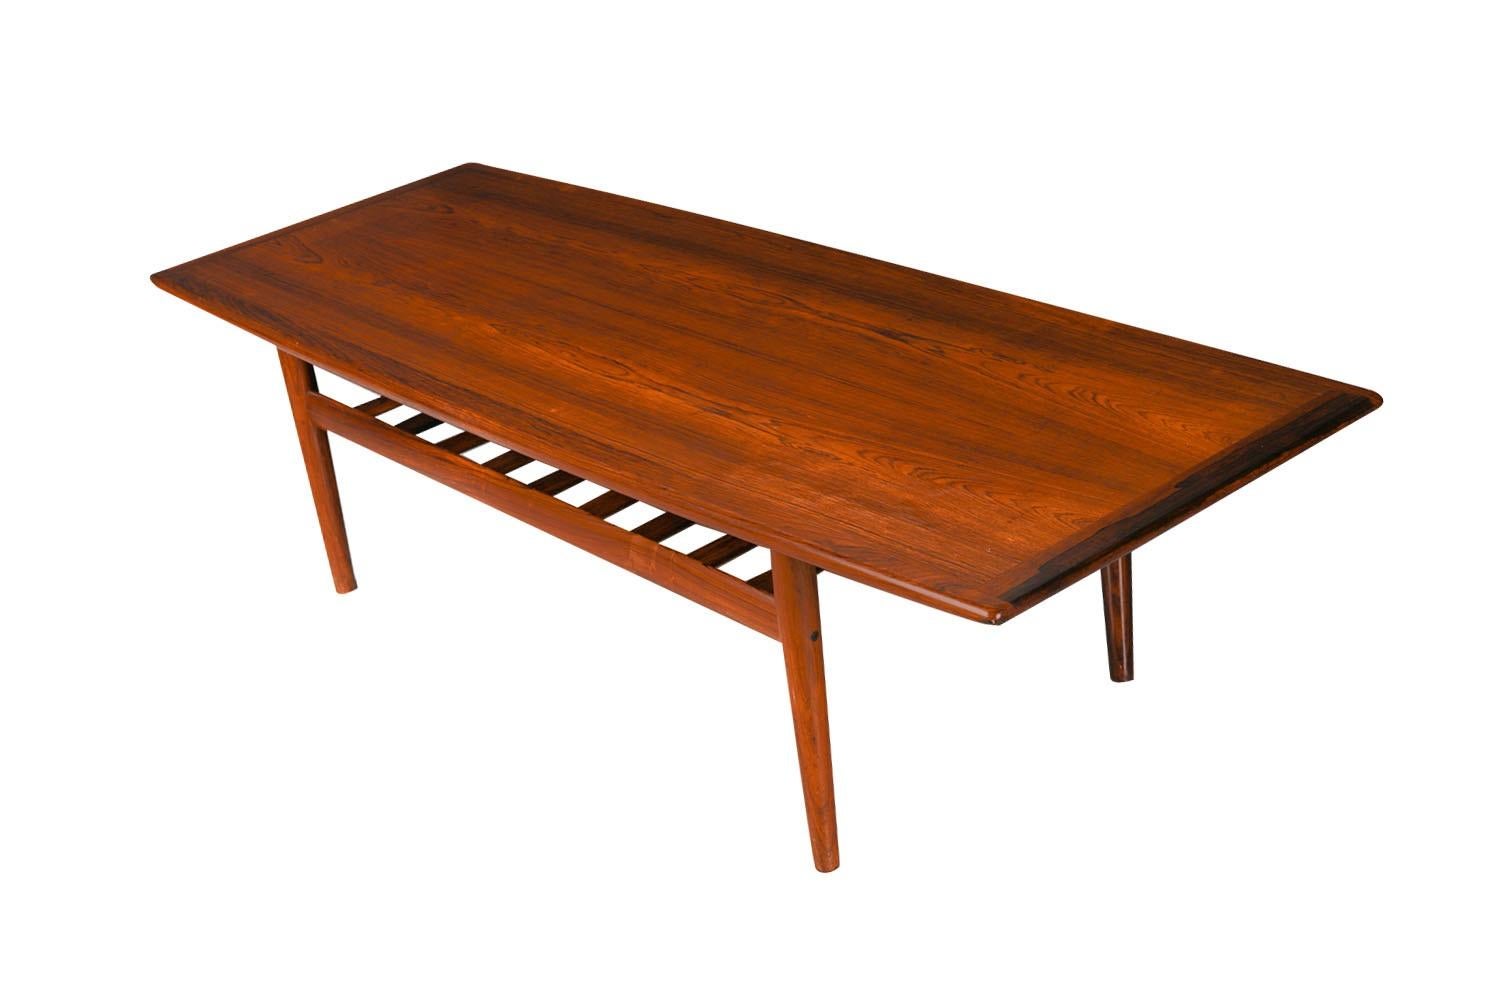 Grete Jalk for Glostrup Mid Century Danish Modern Rosewood Coffee Table In Good Condition For Sale In Baltimore, MD